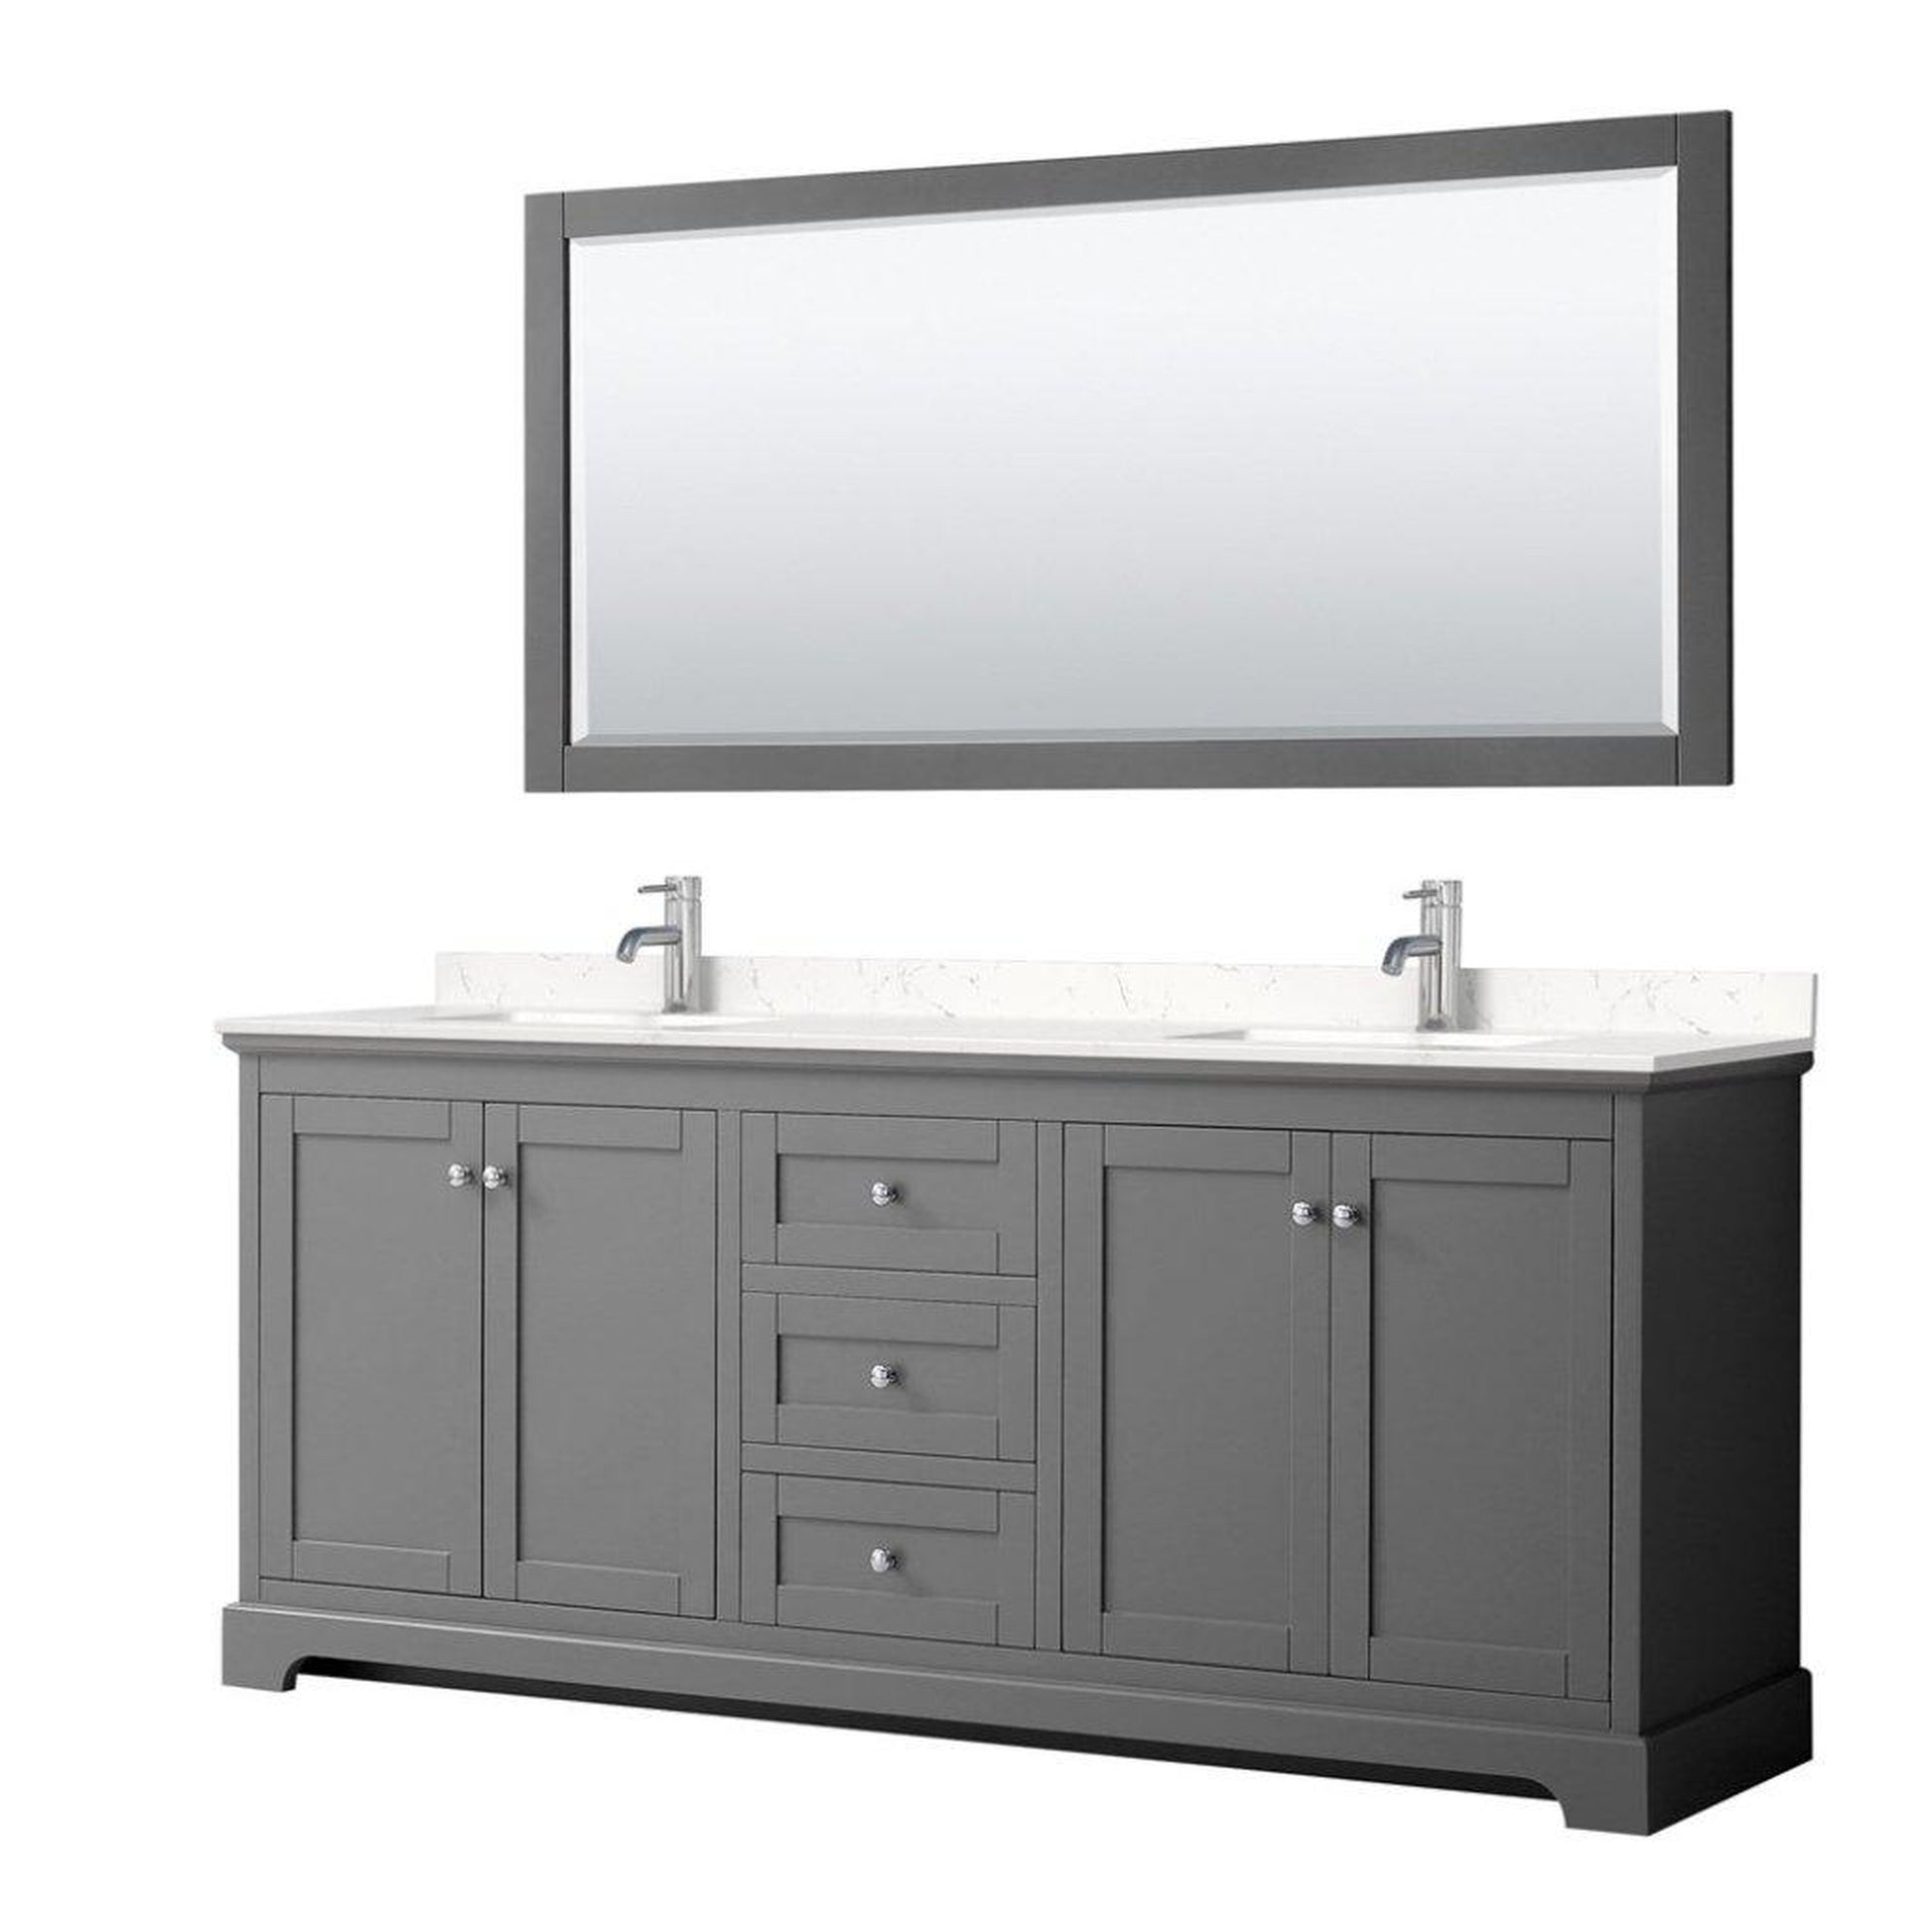 Wyndham Collection Avery 80" Dark Gray Double Bathroom Vanity Set With Light-Vein Cultured Marble Countertop With 1-Hole Faucet And Square Sink And 70" Mirror